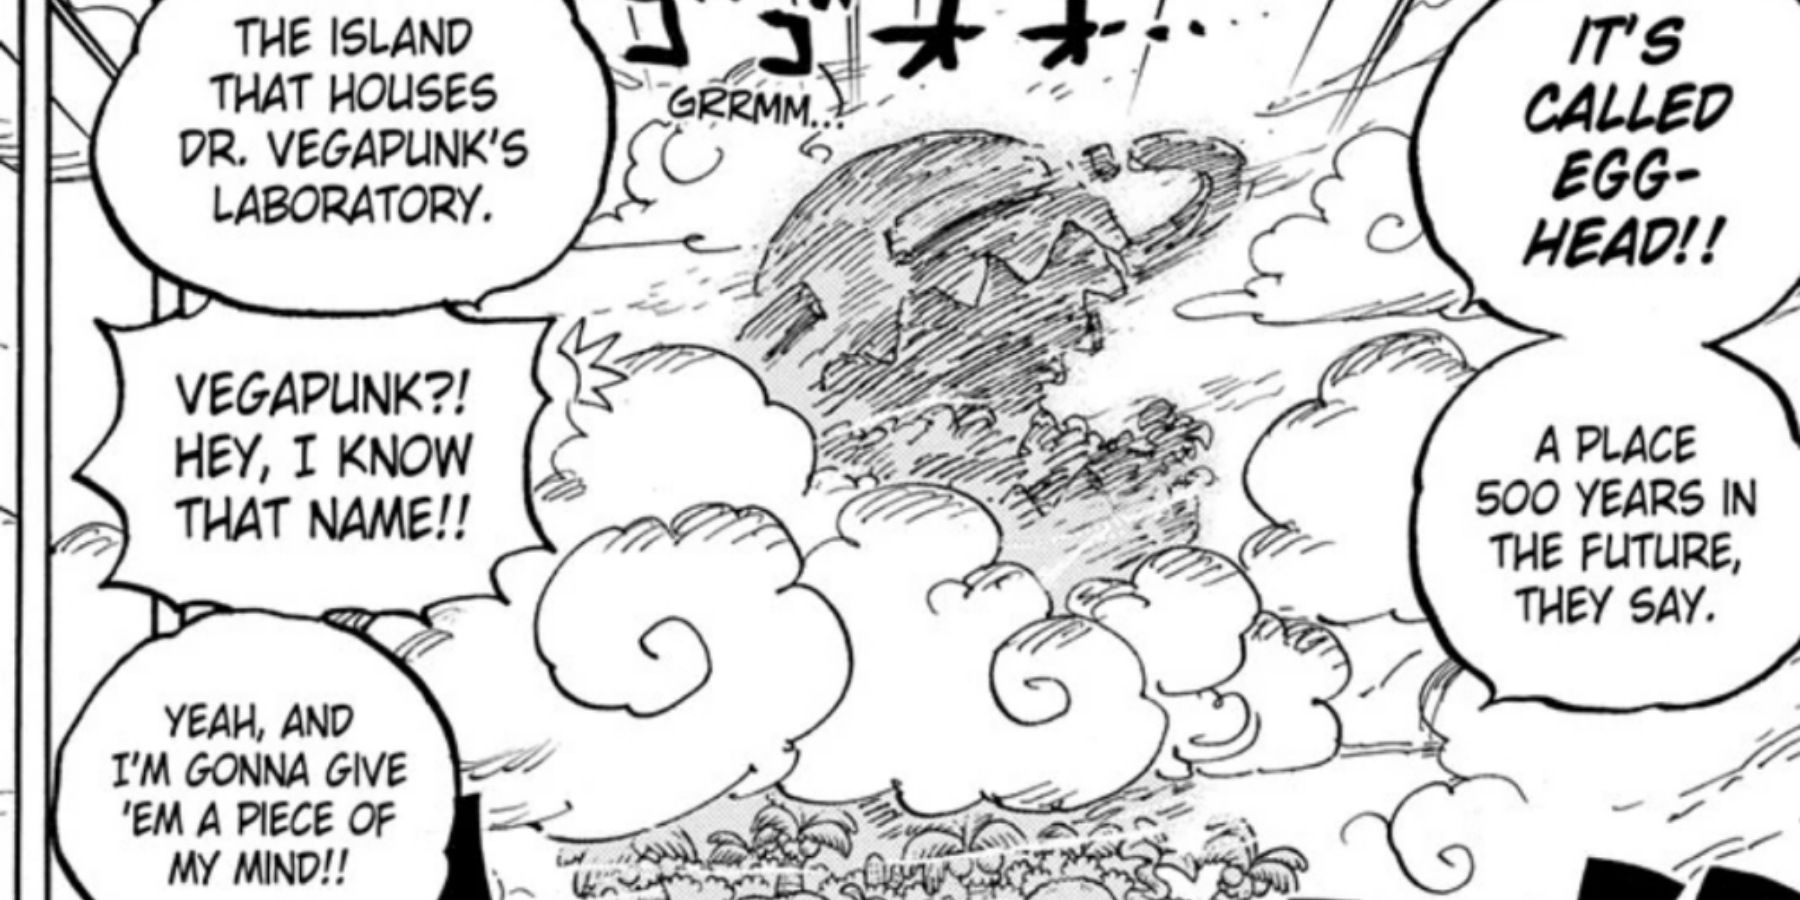 One Piece: Why Boa Hancock Could Be The Strongest Shichibukai